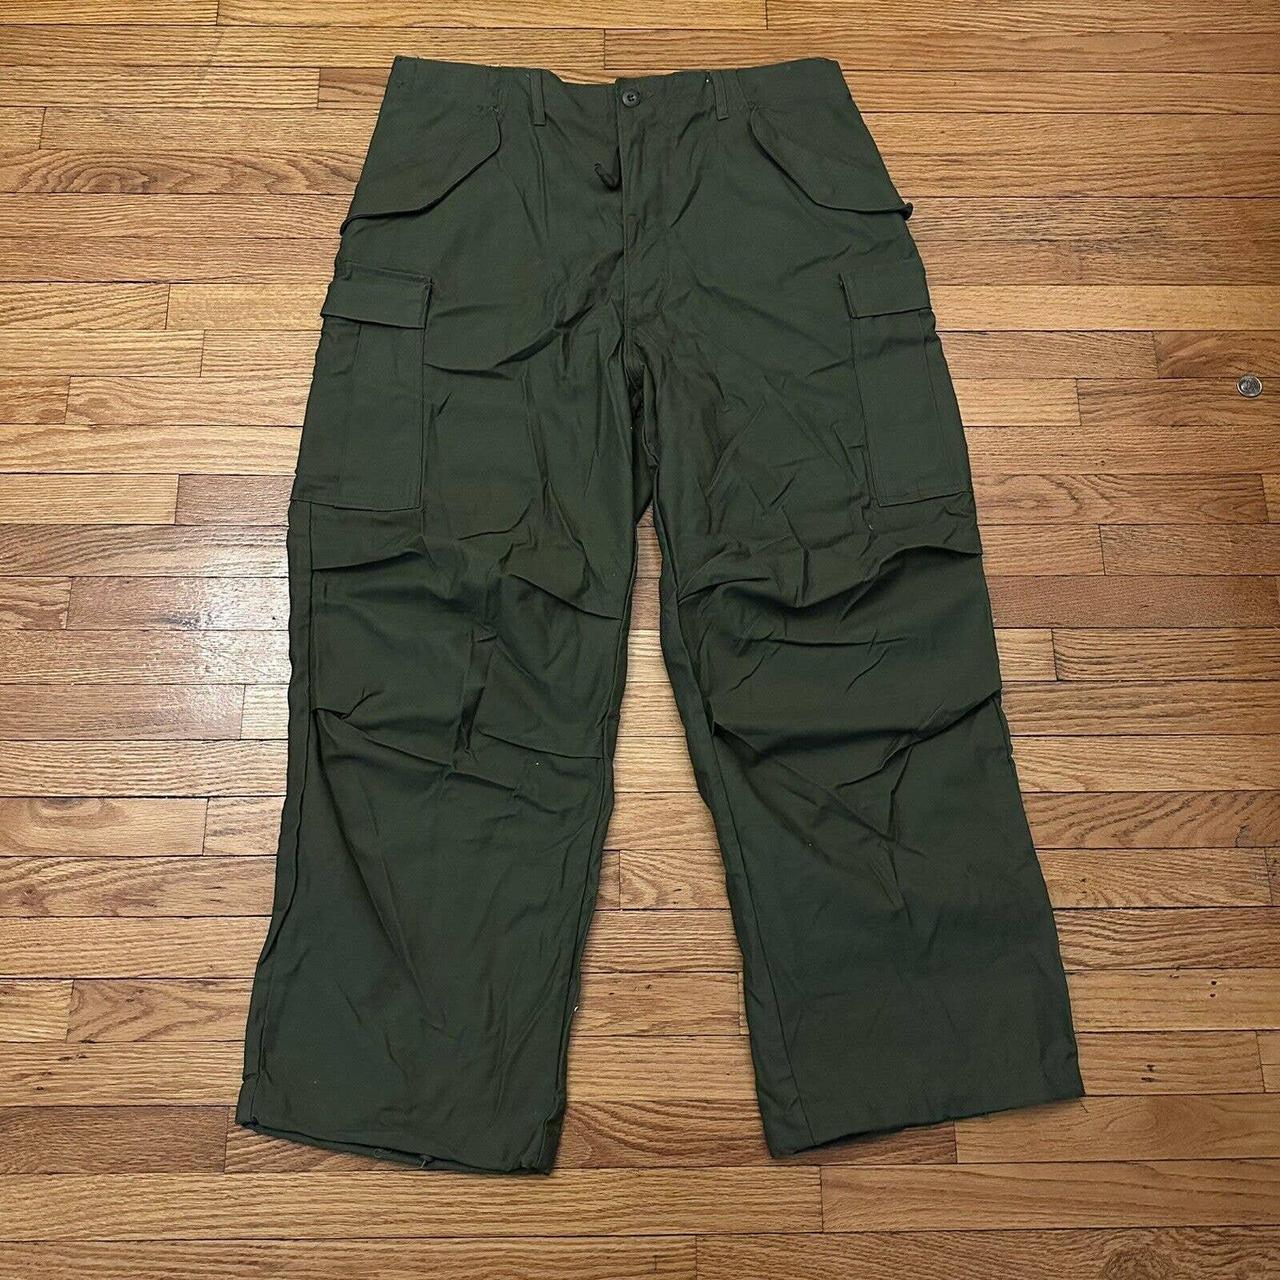 Vintage 70s US Army Military Cold Weather Trousers...